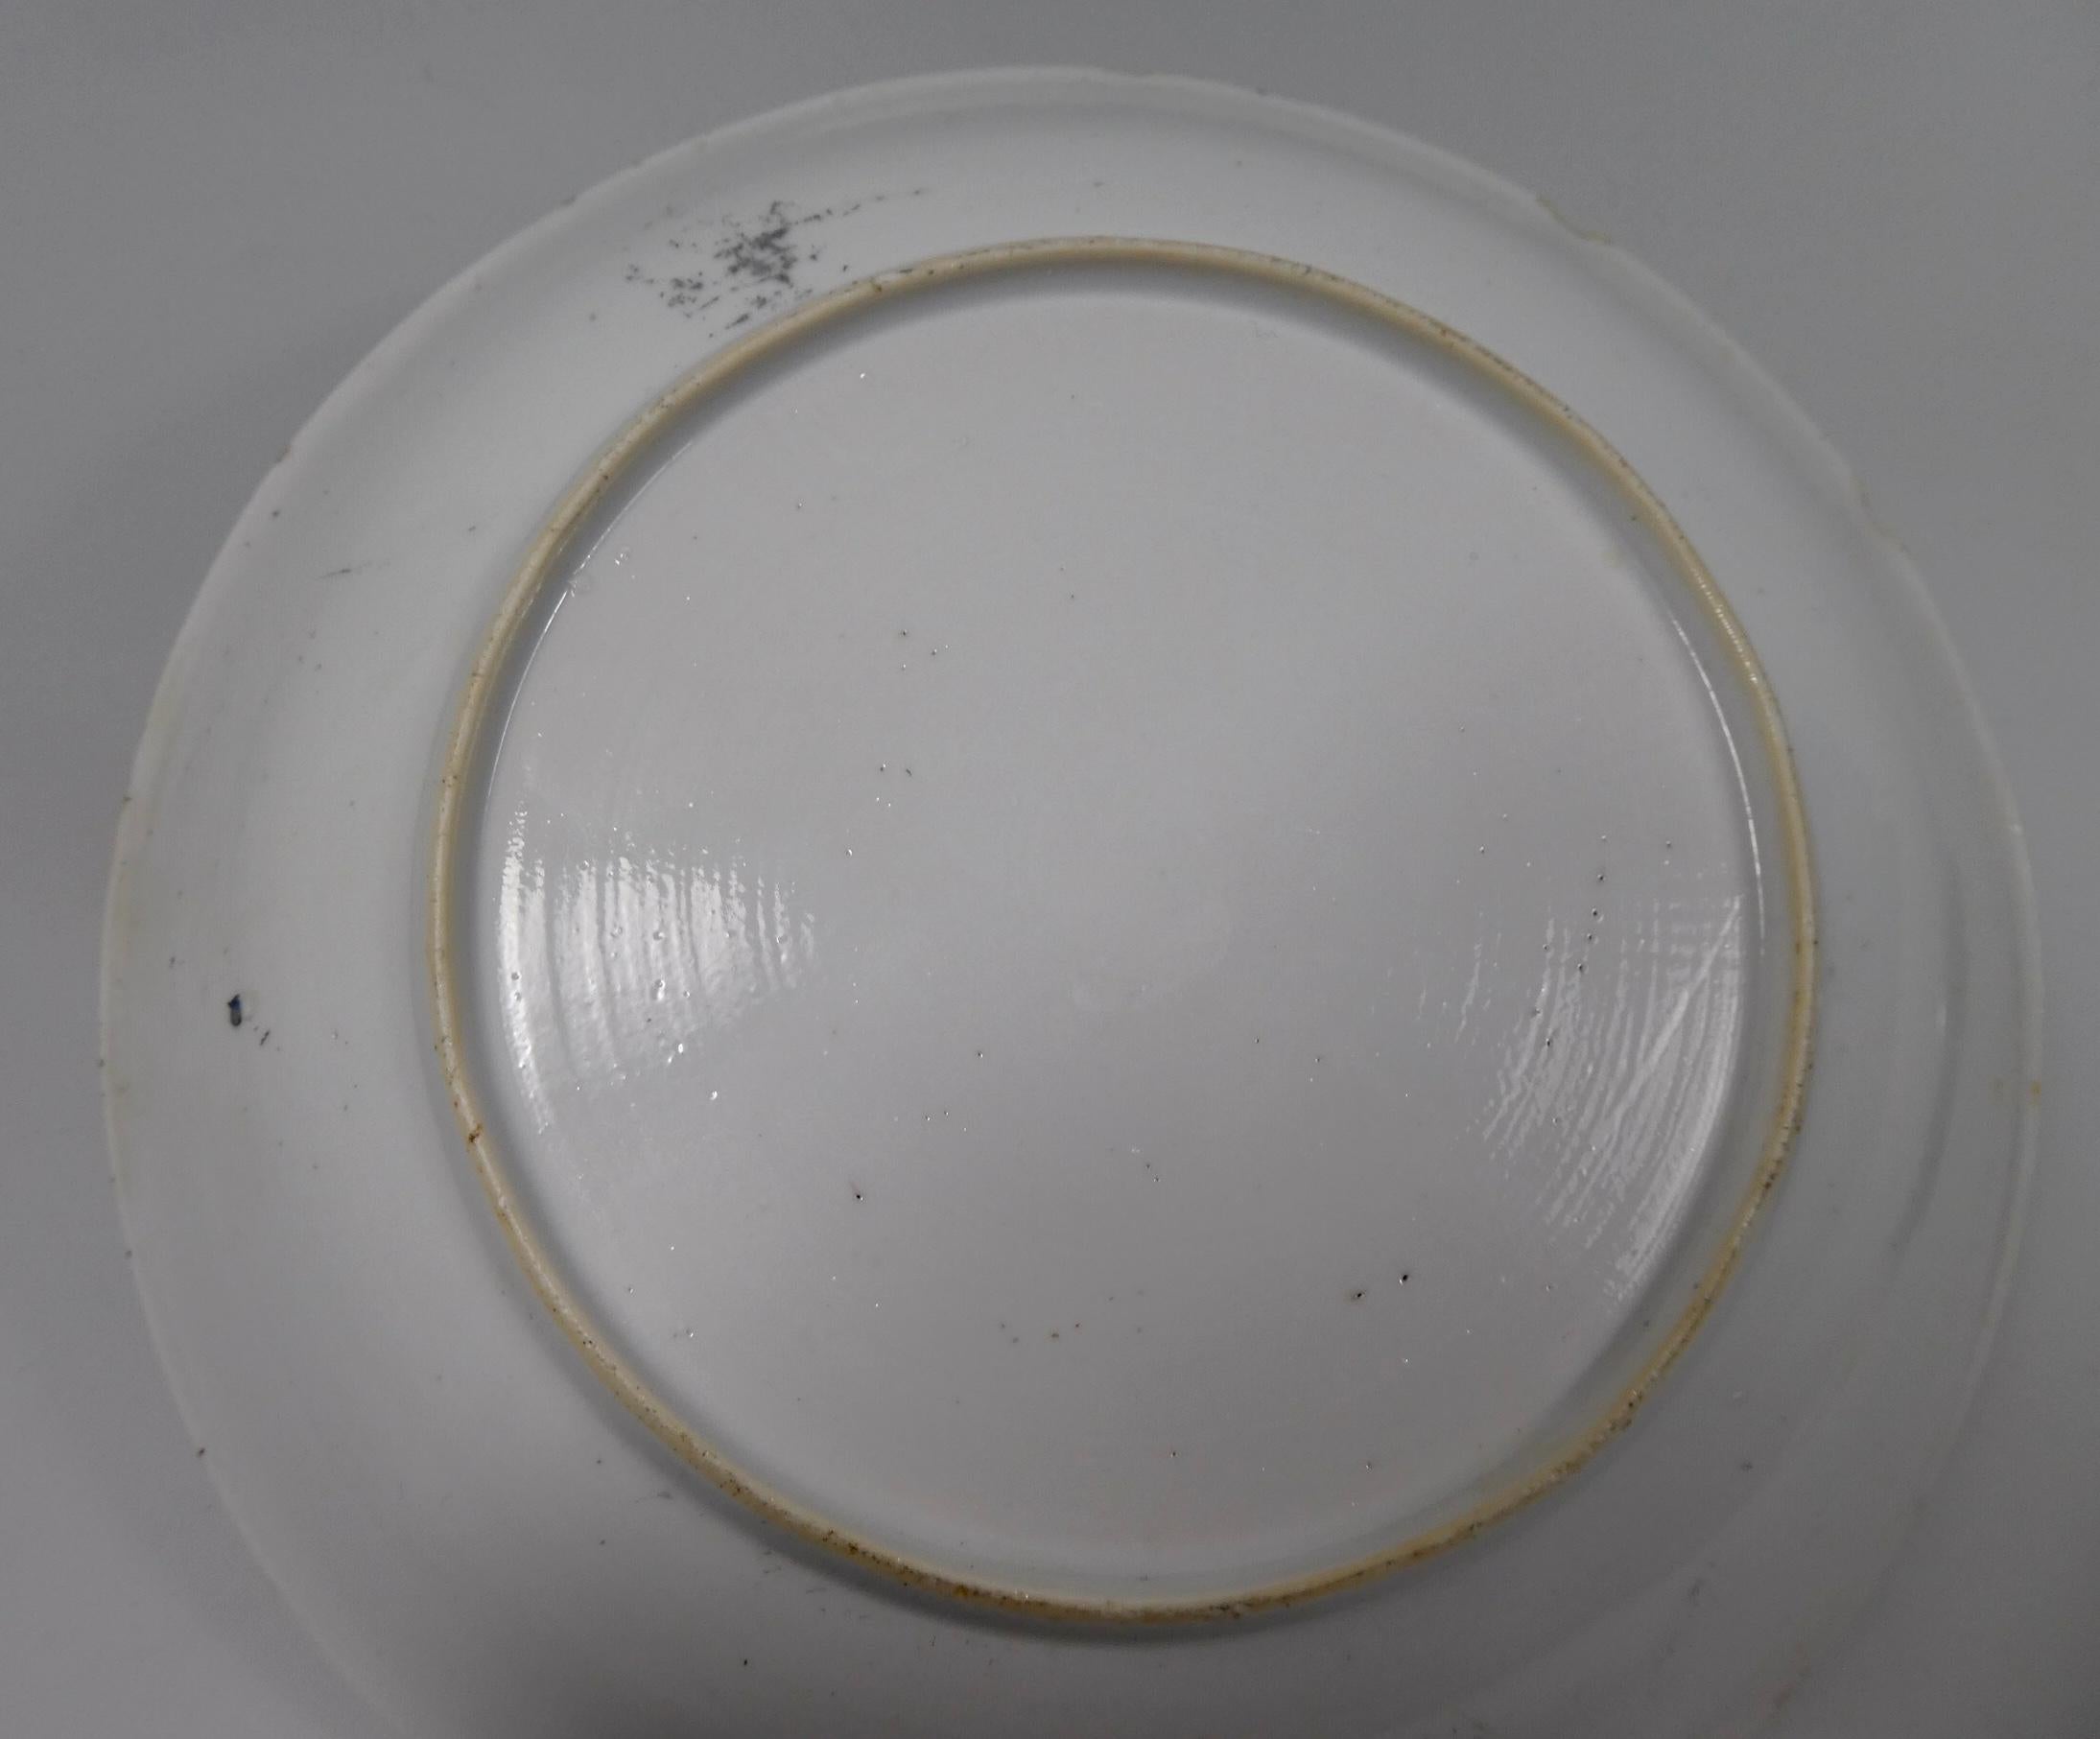 Other Chinese Porcelain Plate, Wucai Decoration, Shunzhi Period ‘1644-1661’